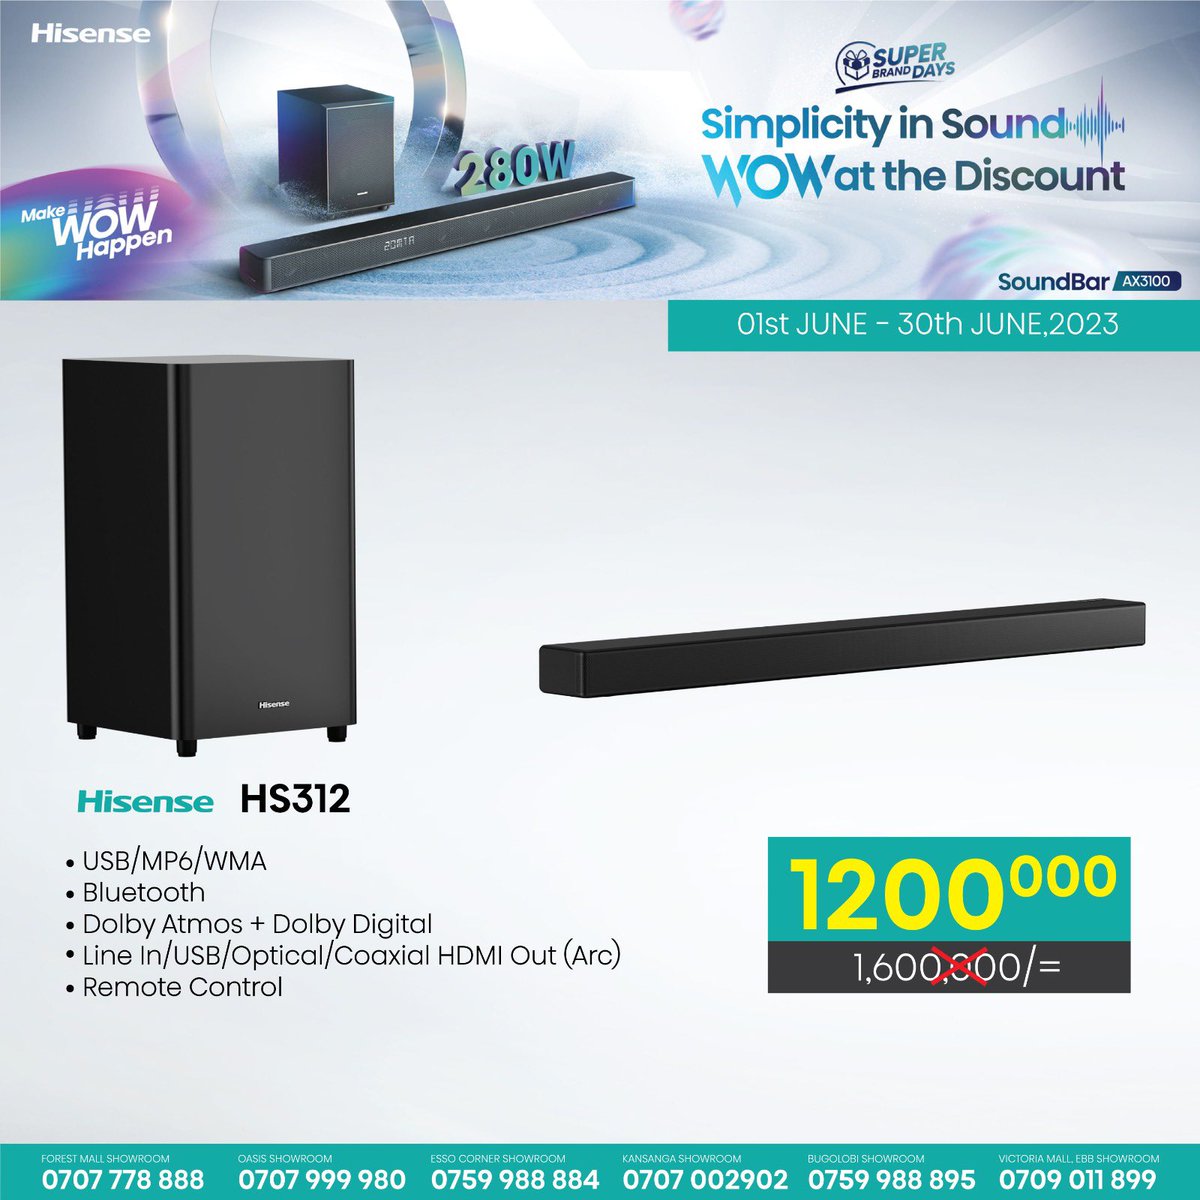 Always wanted to get yourself a sound bar?🌚

Well here is your chance, @HisenseUg has greatly discounted them this month! Passby any showroom to get yours today😊

#MakeWowHappen
#SuperBrandDays